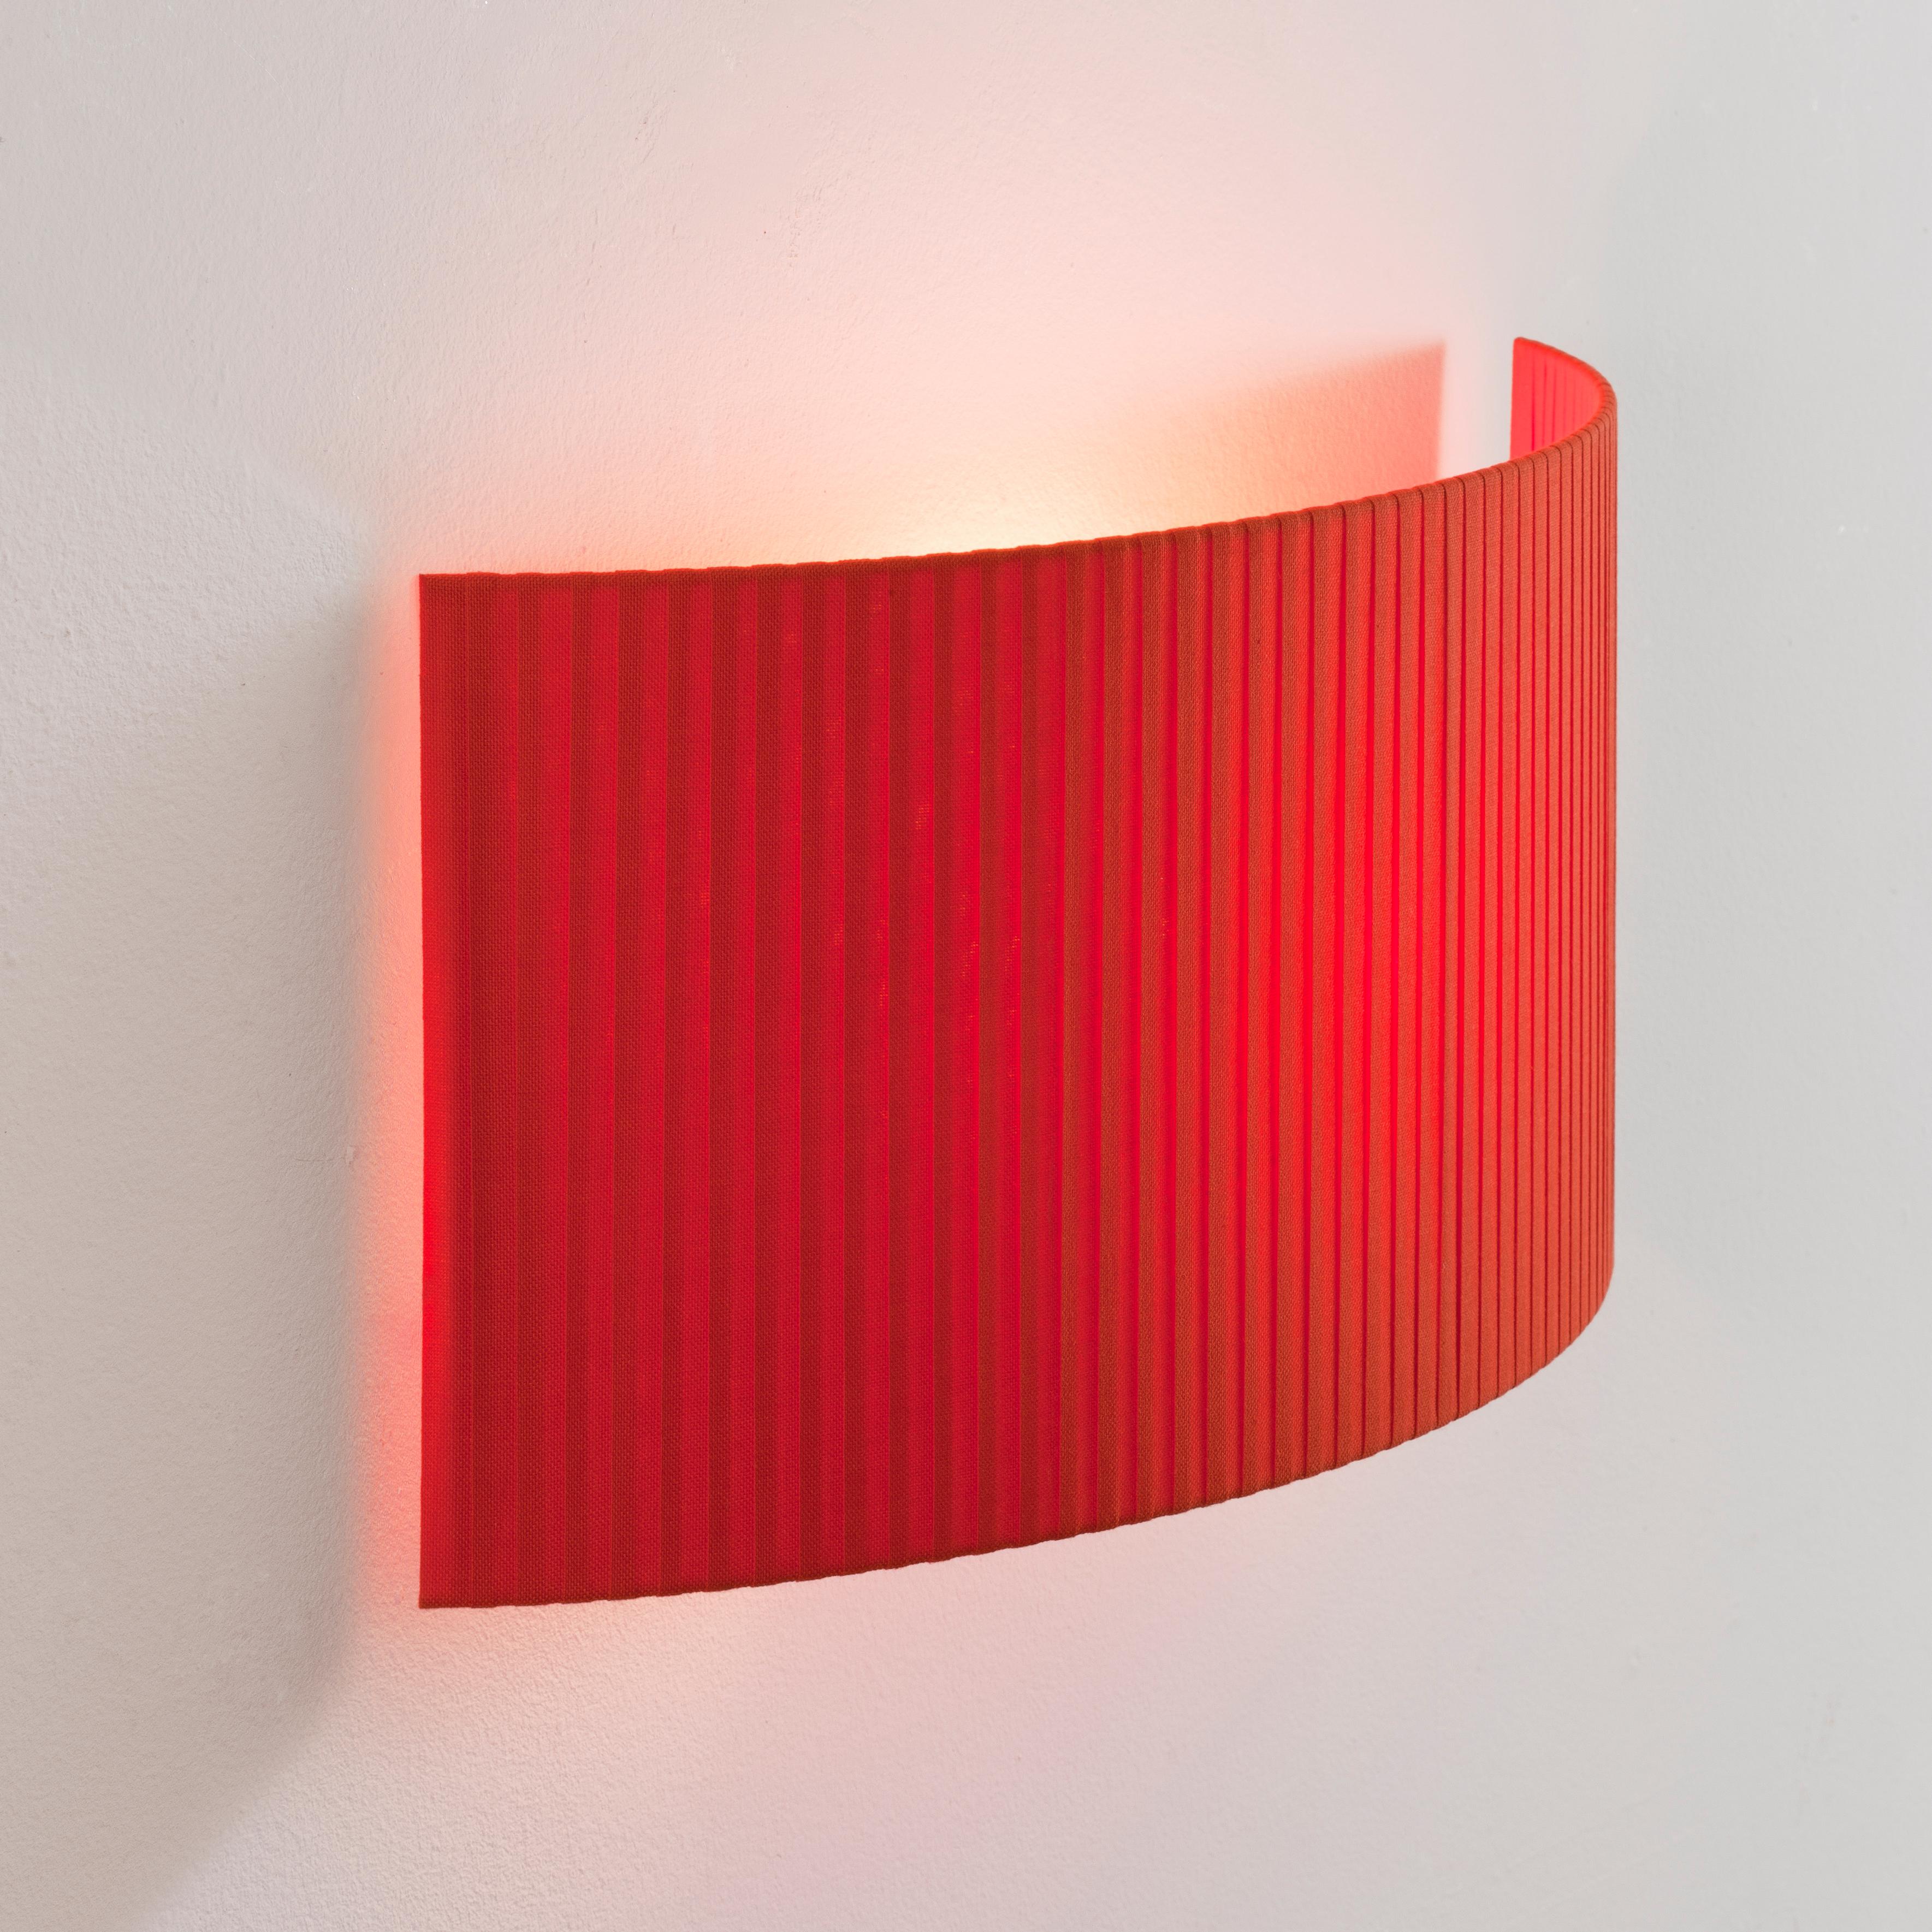 Spanish Red Comodín Rectangular Wall Lamp by Santa & Cole For Sale